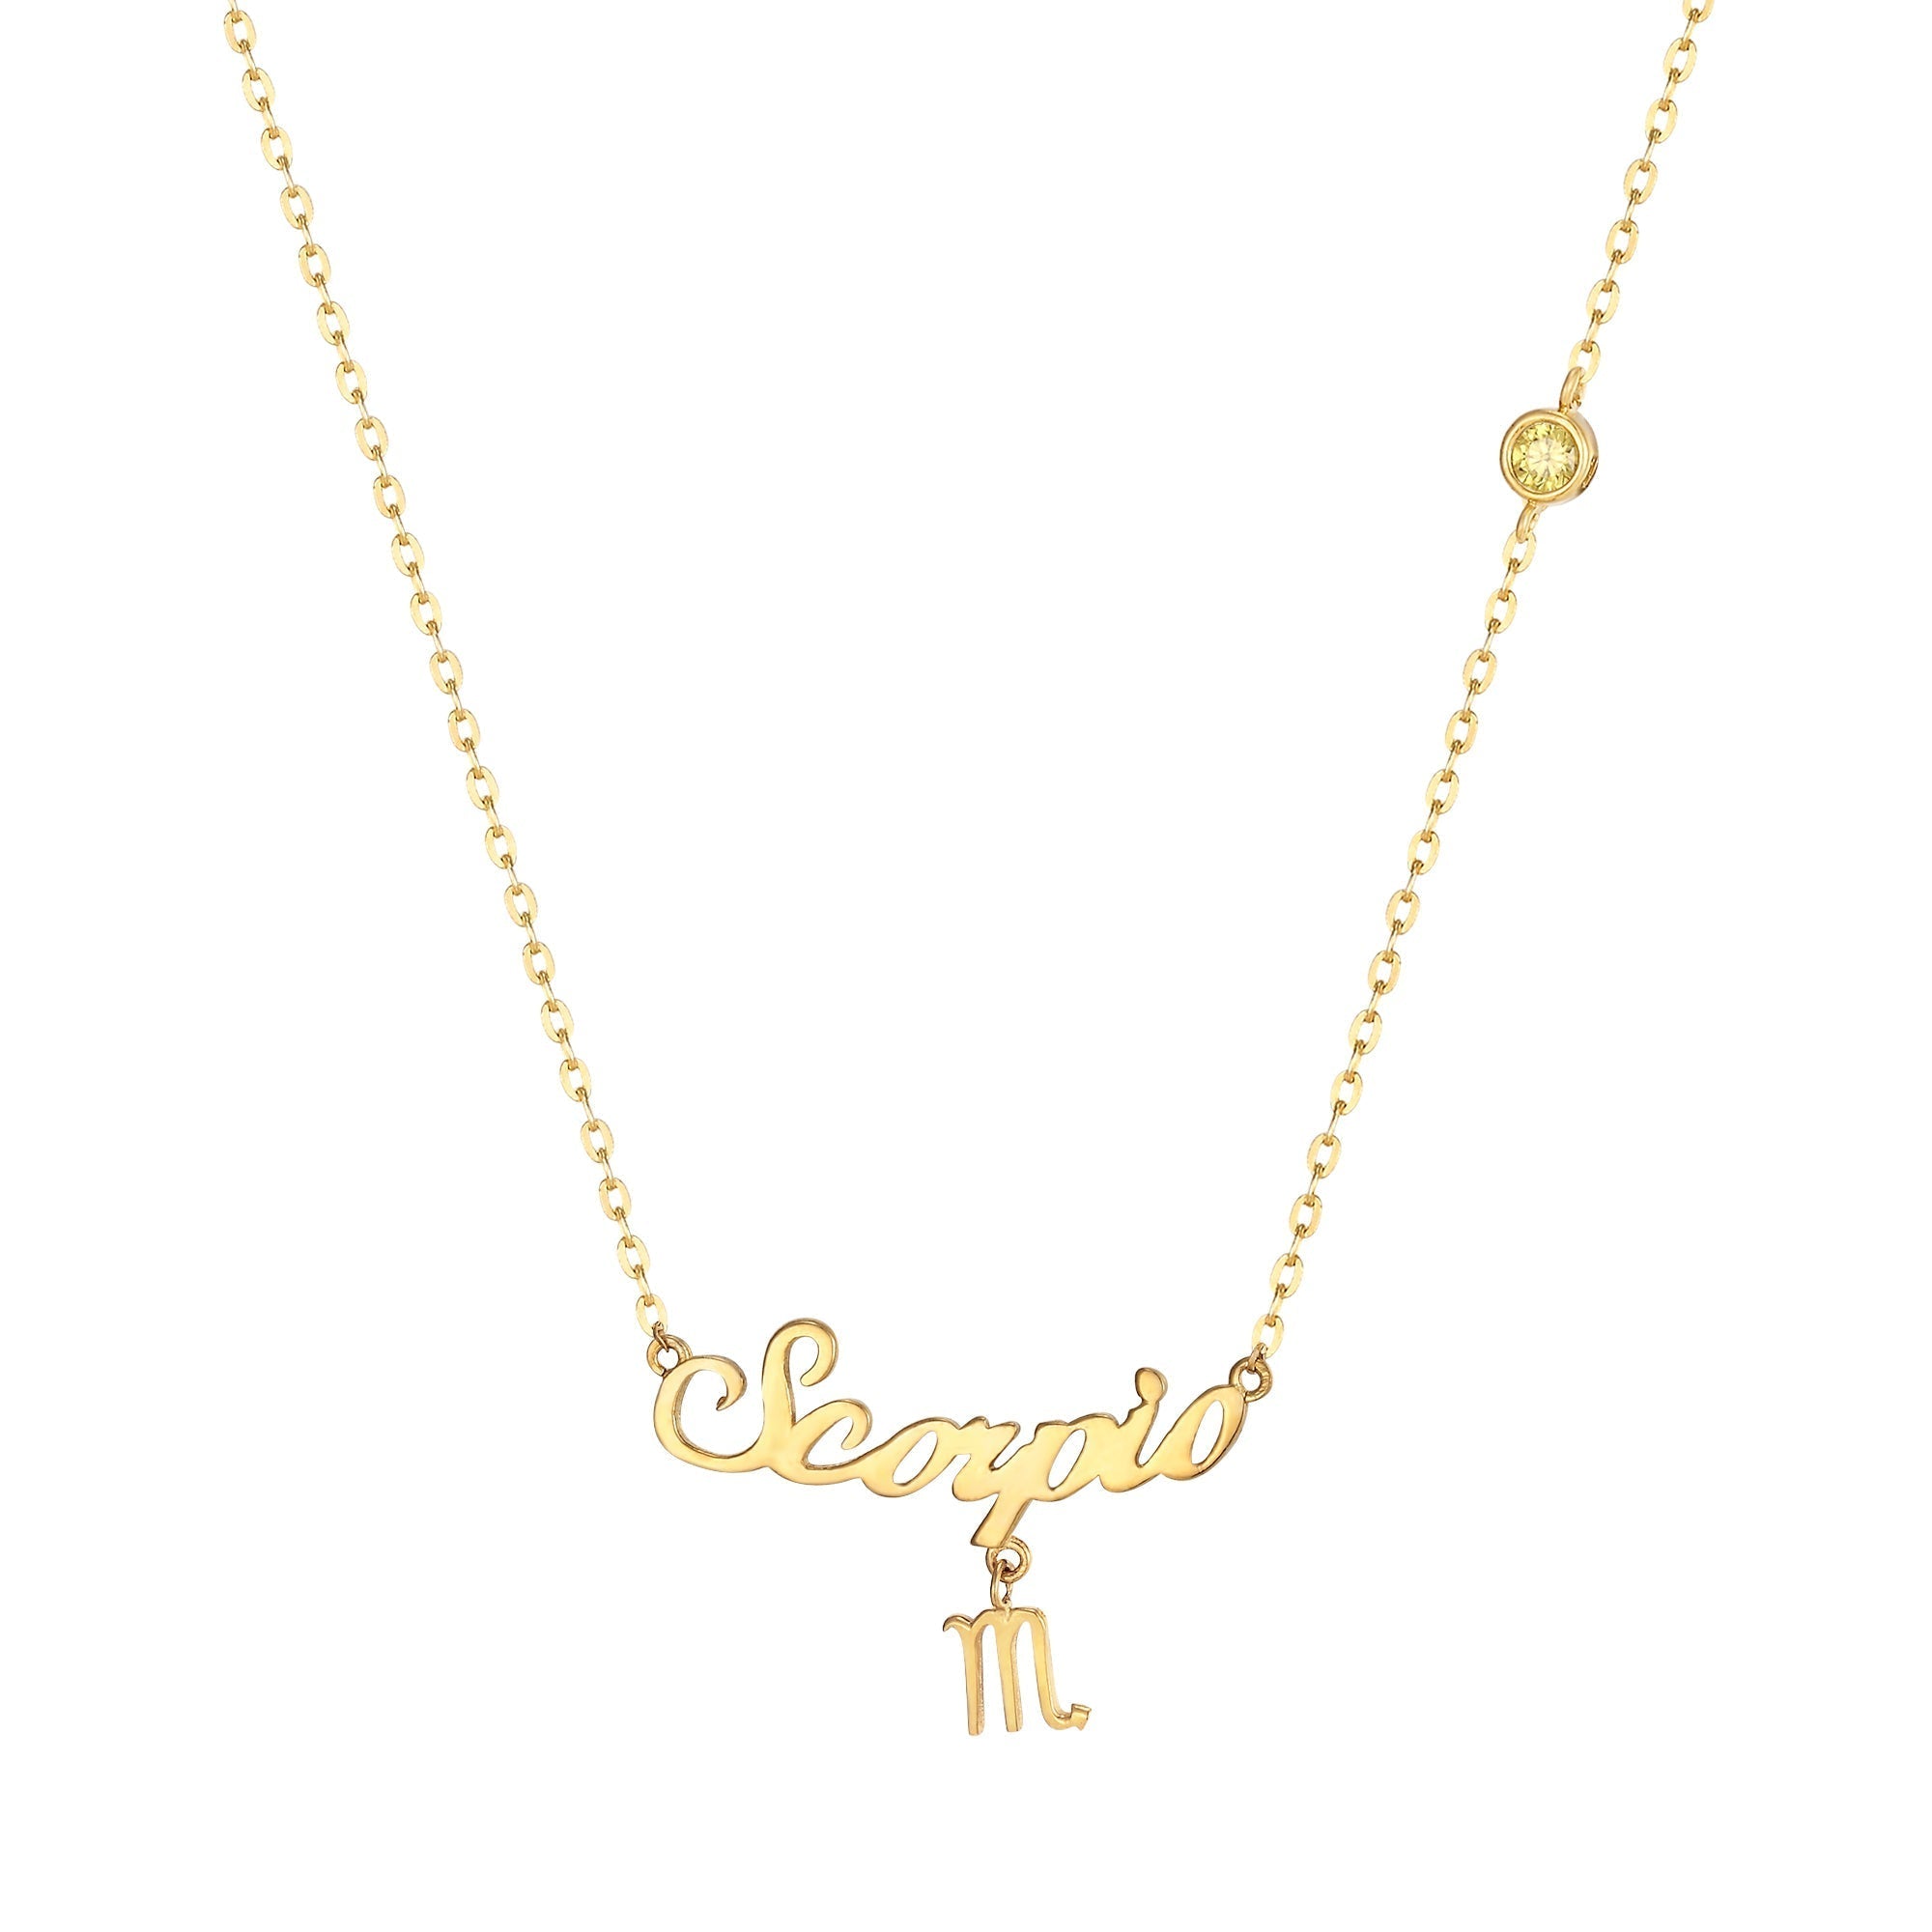 9ct gold Scorpio star sign necklace - seolgold